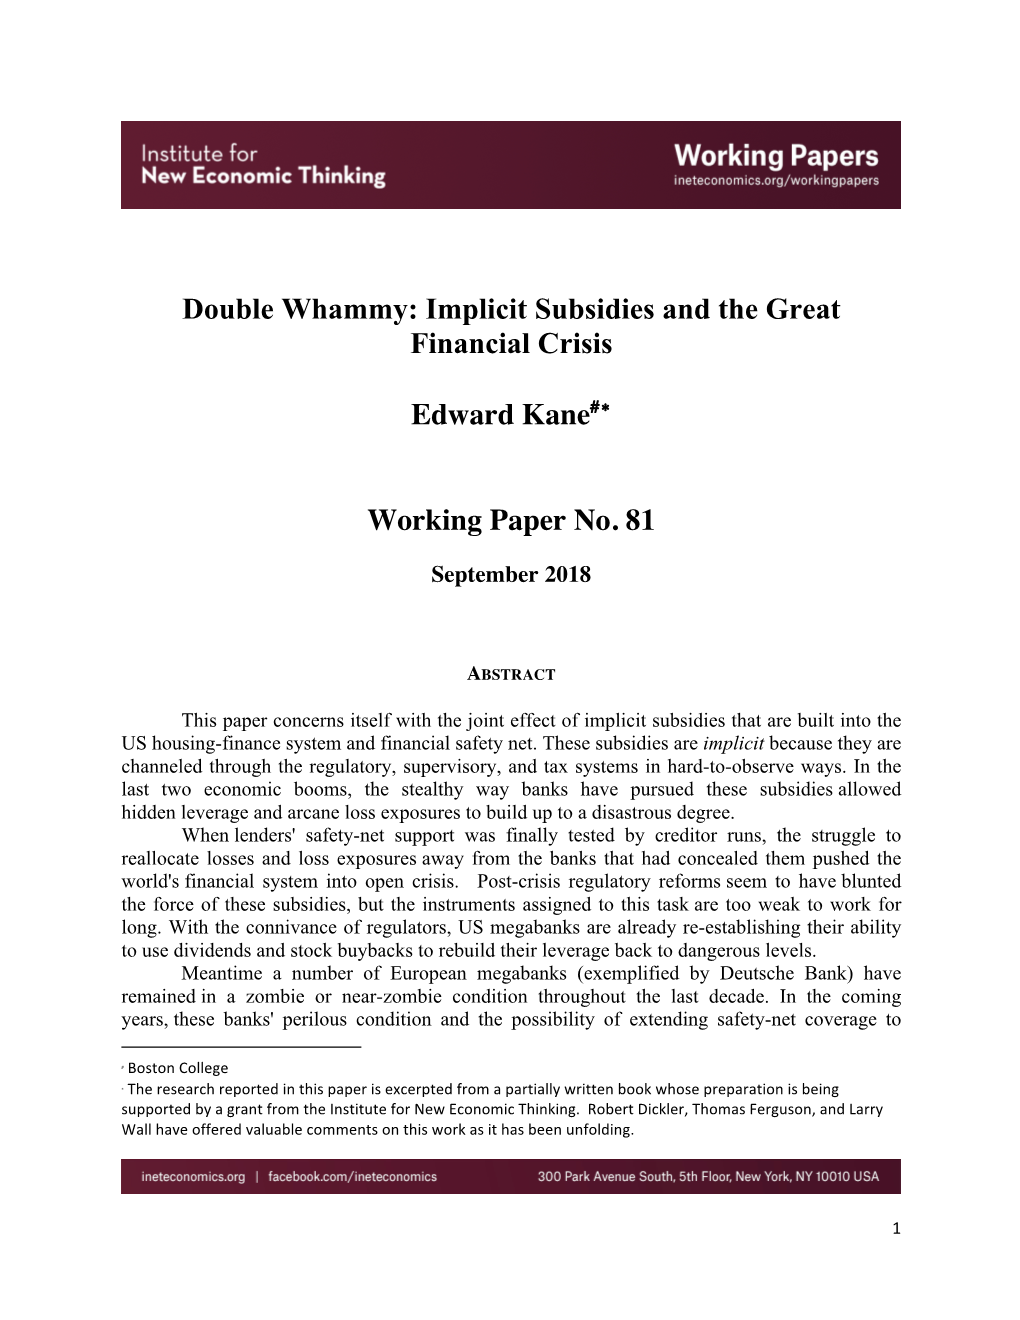 Double Whammy: Implicit Subsidies and the Great Financial Crisis Edward Kane#∗ Working Paper No. 81